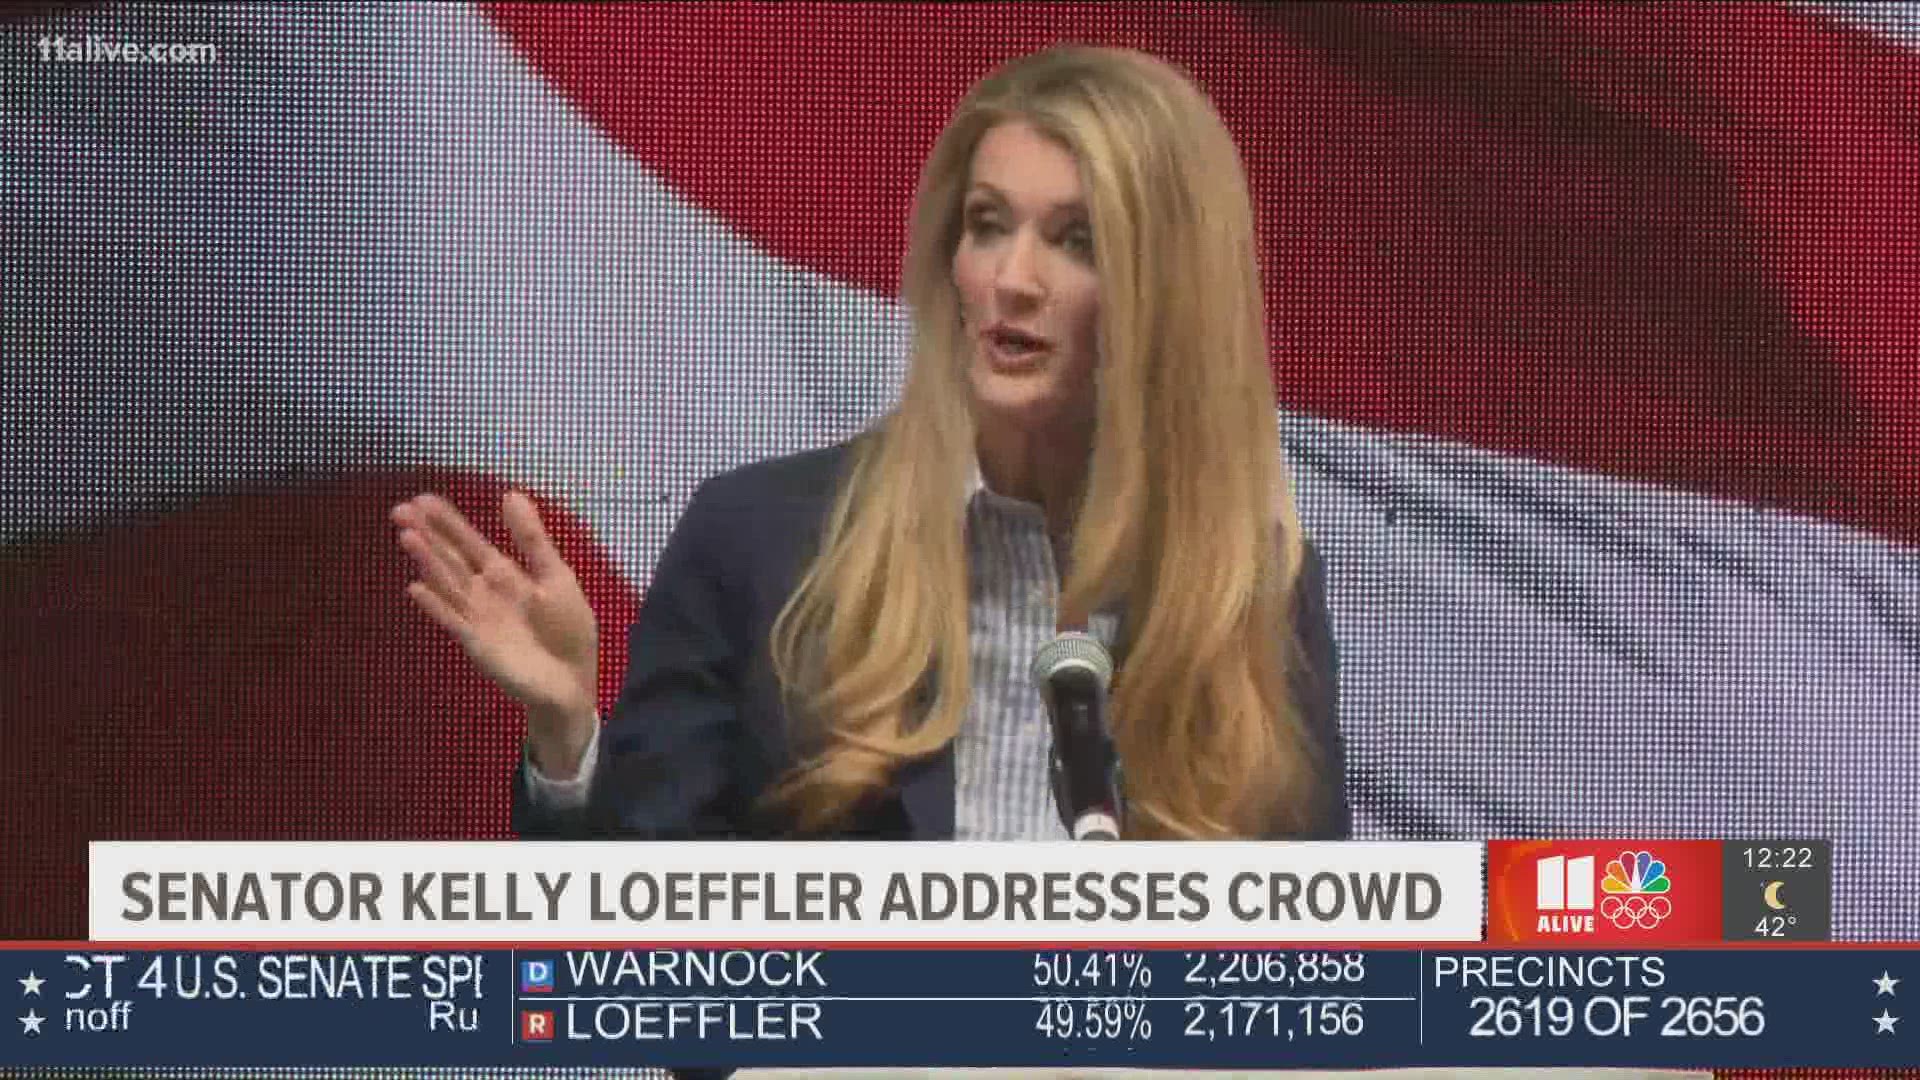 Incumbent Senator Kelly Leoffler spoke to a crowd gathered in Atlanta on Election Night as she trails her opponent in the Senate race.